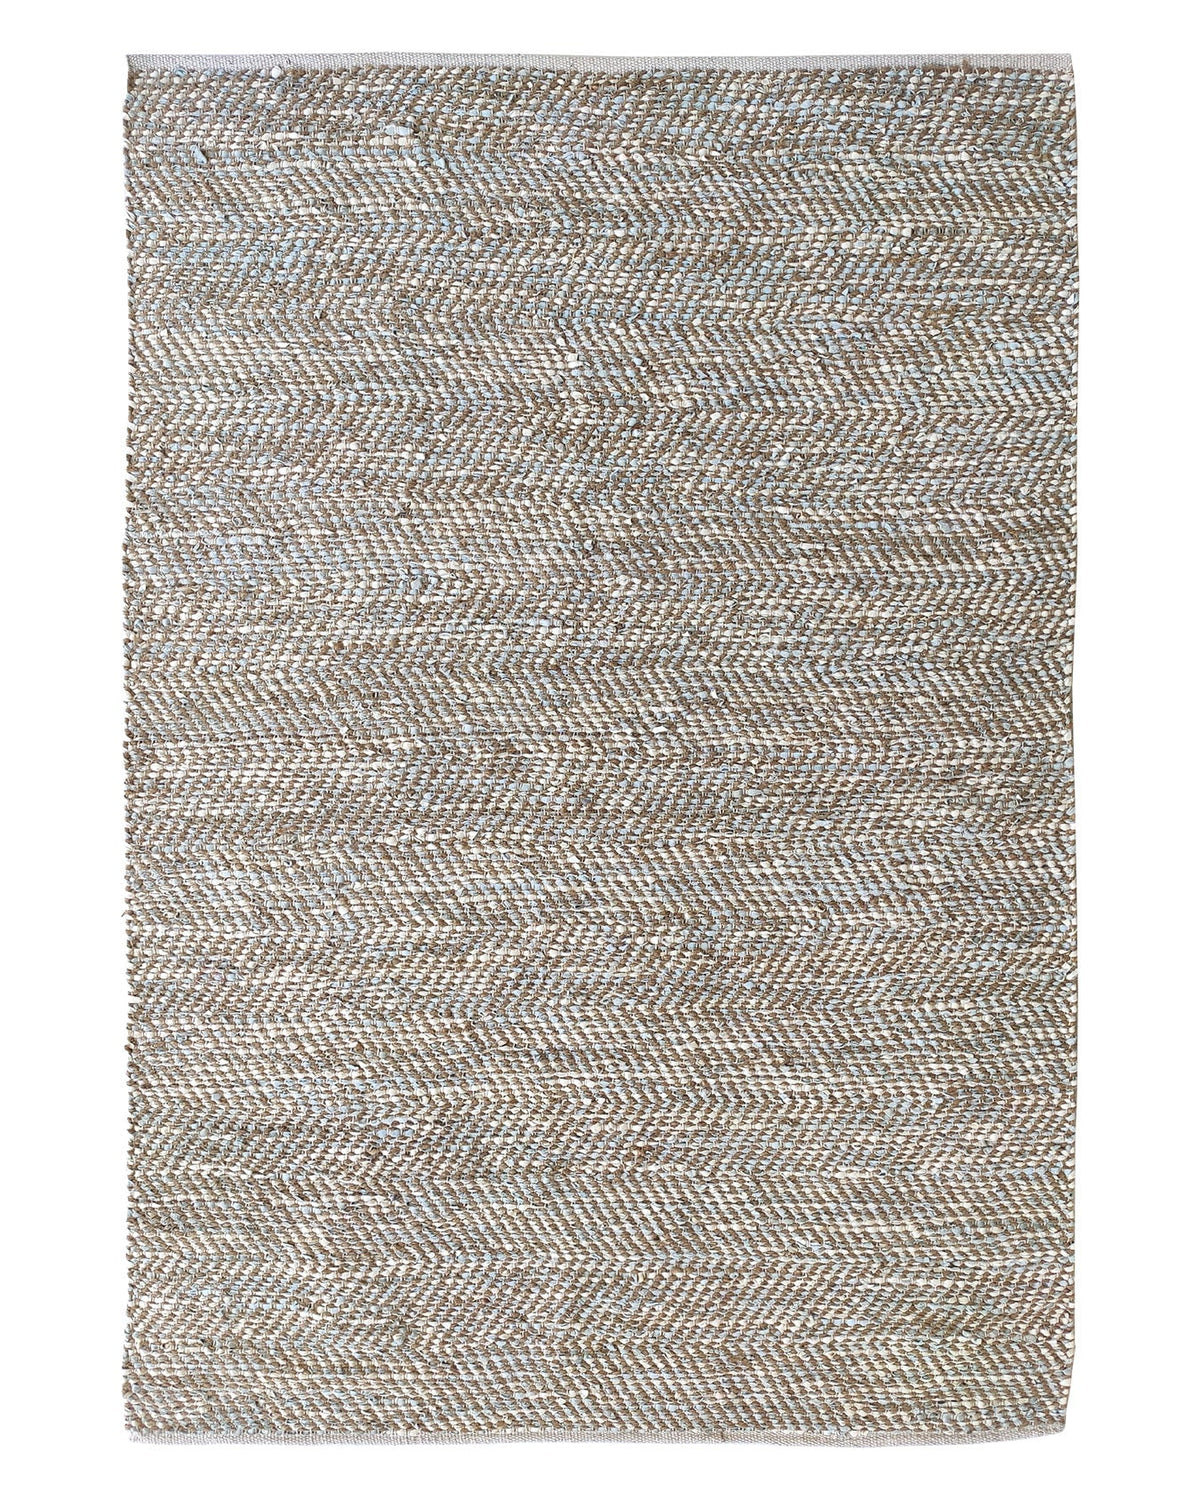 Hand Made Multi Color Floor Woven Rug (2 Sizes)